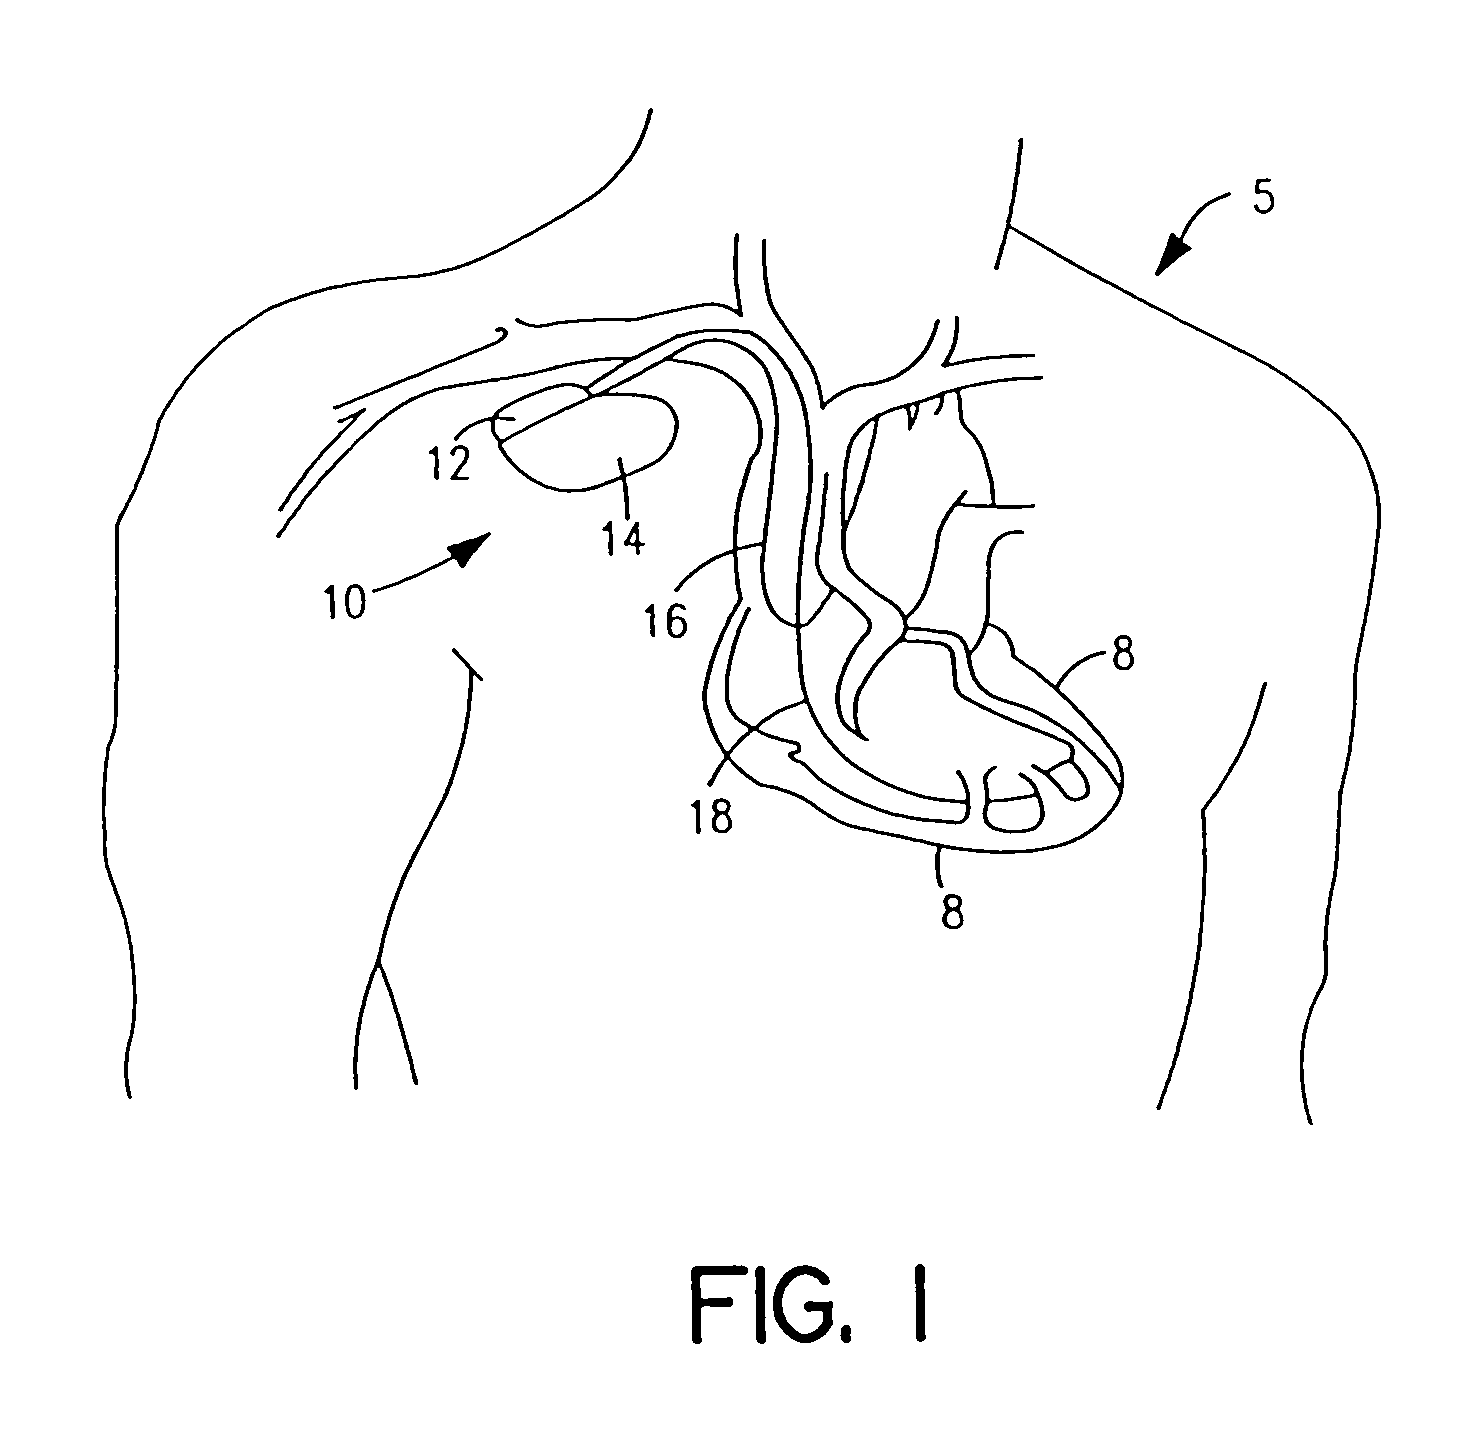 System and method for remote programming of an implantable medical device